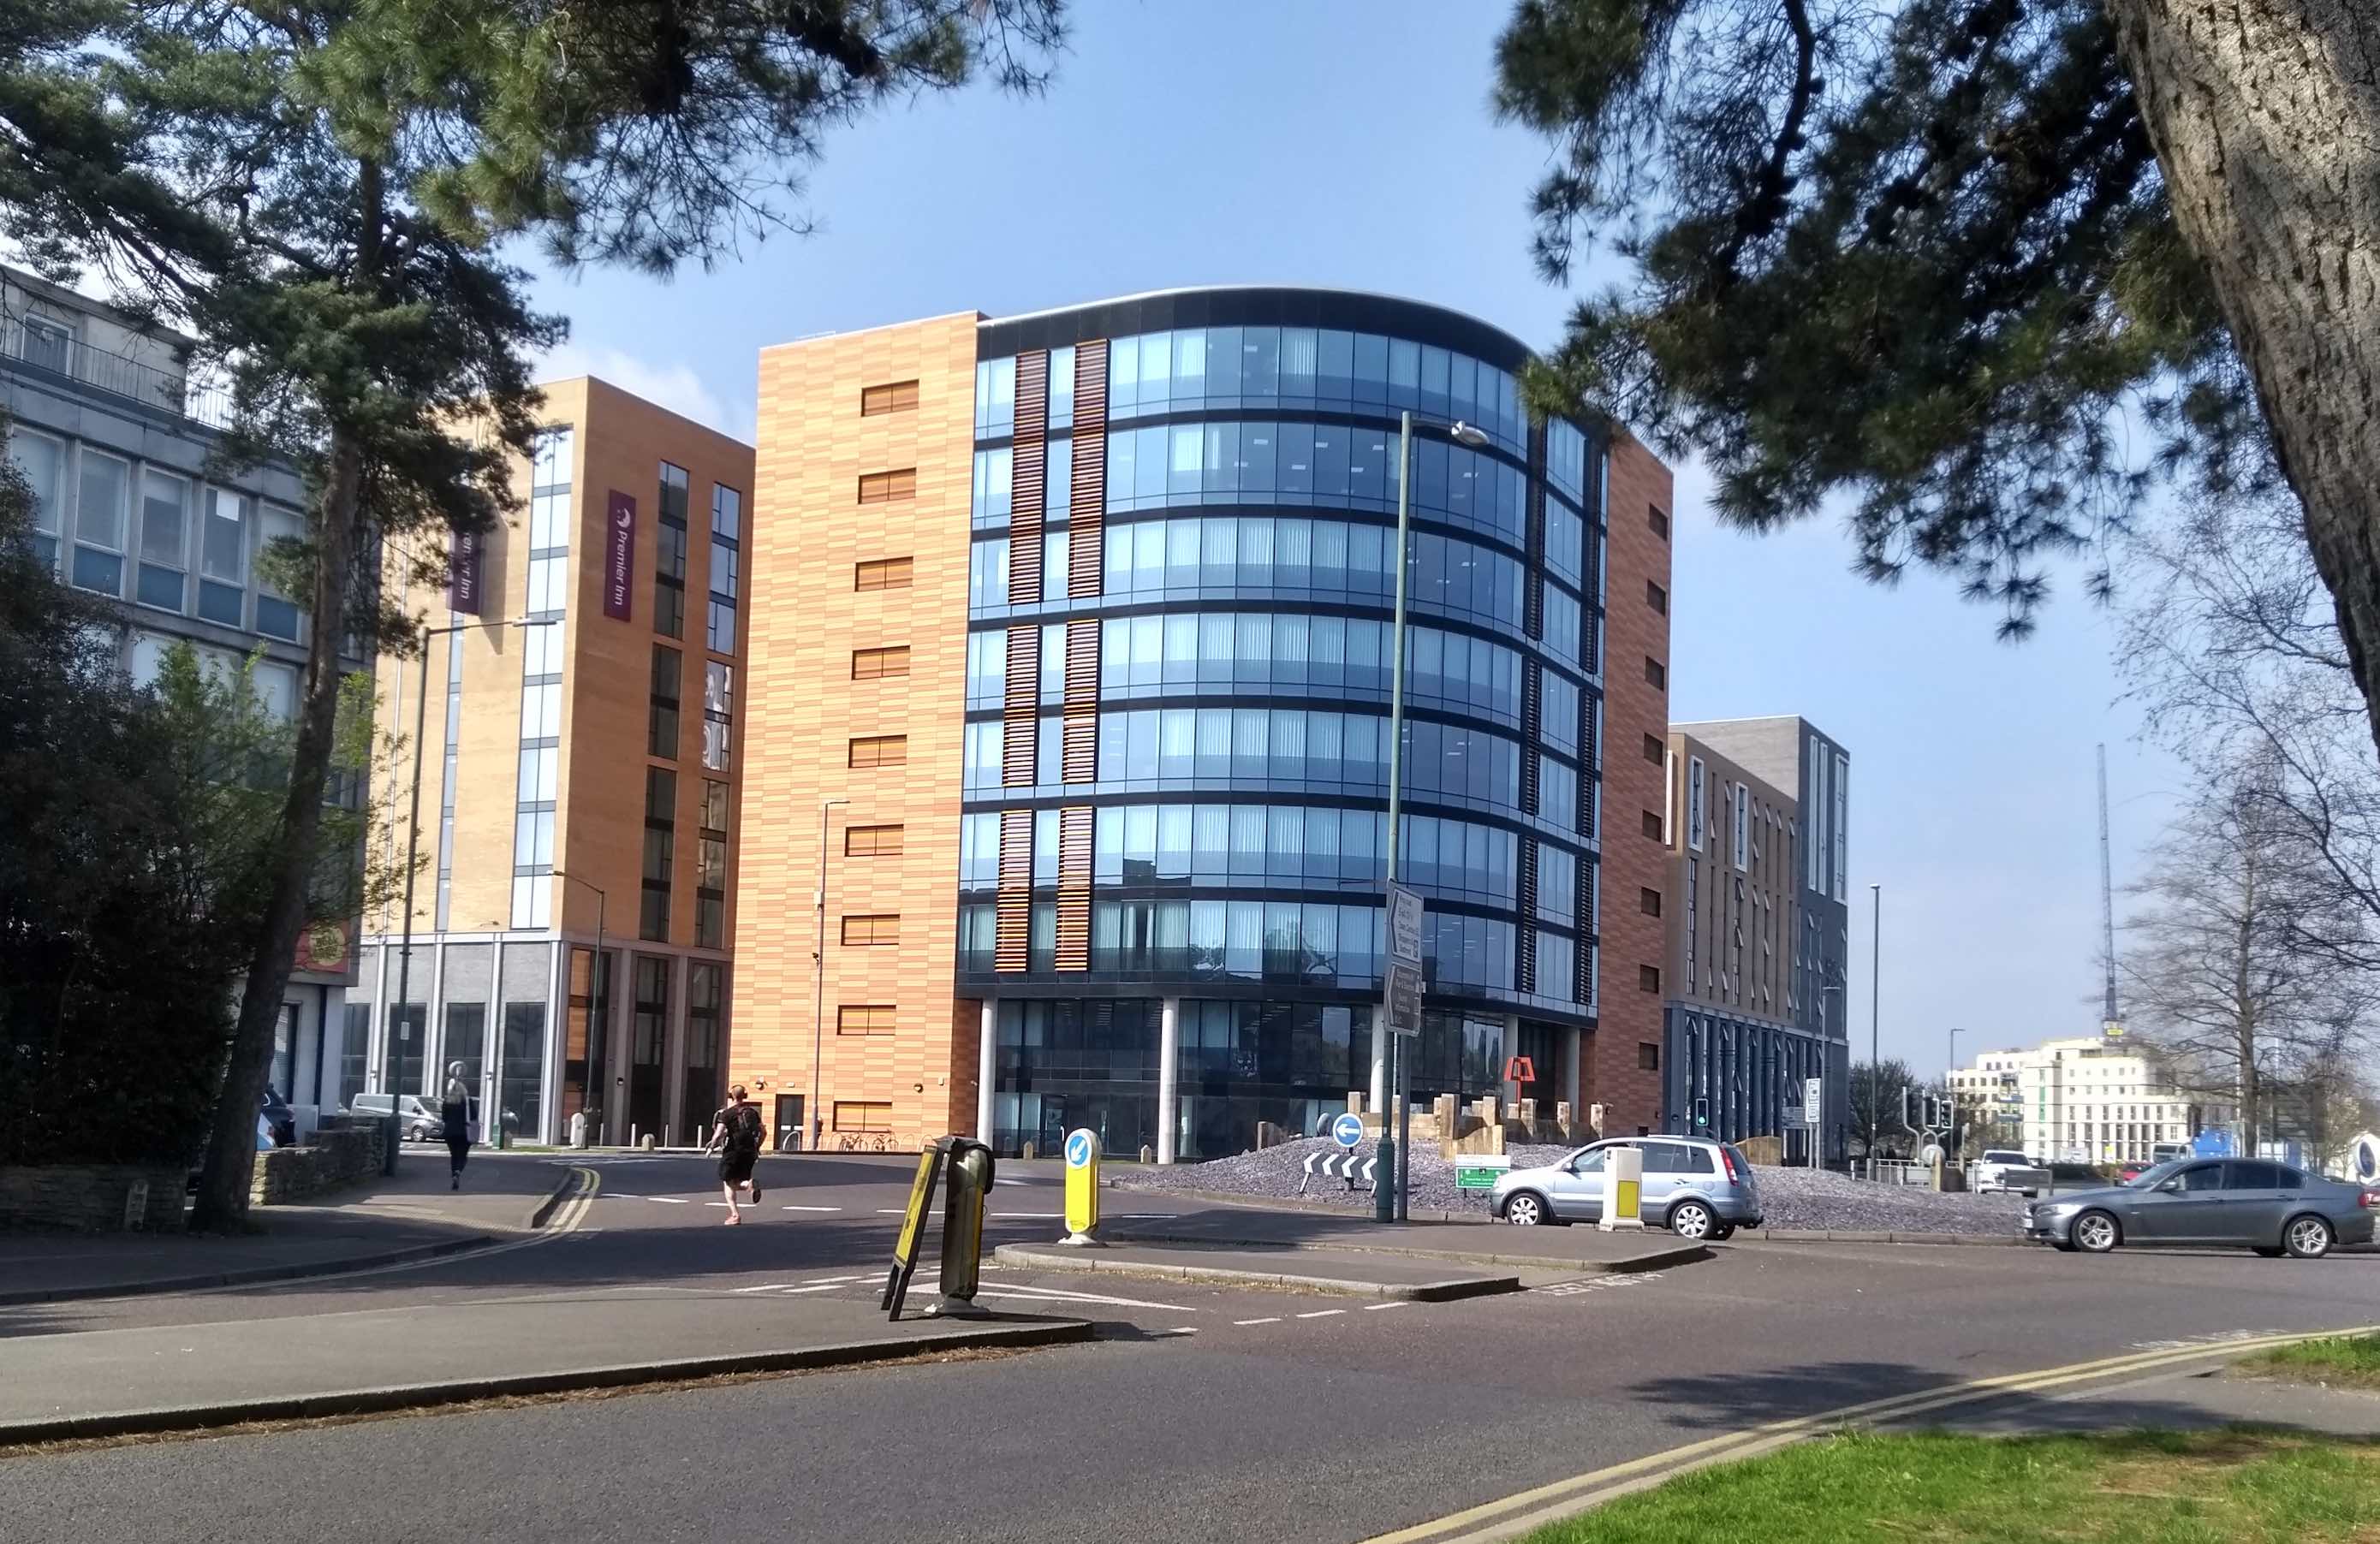 Photograph of One Lansdowne Plaza from St Swithuns Roundabout